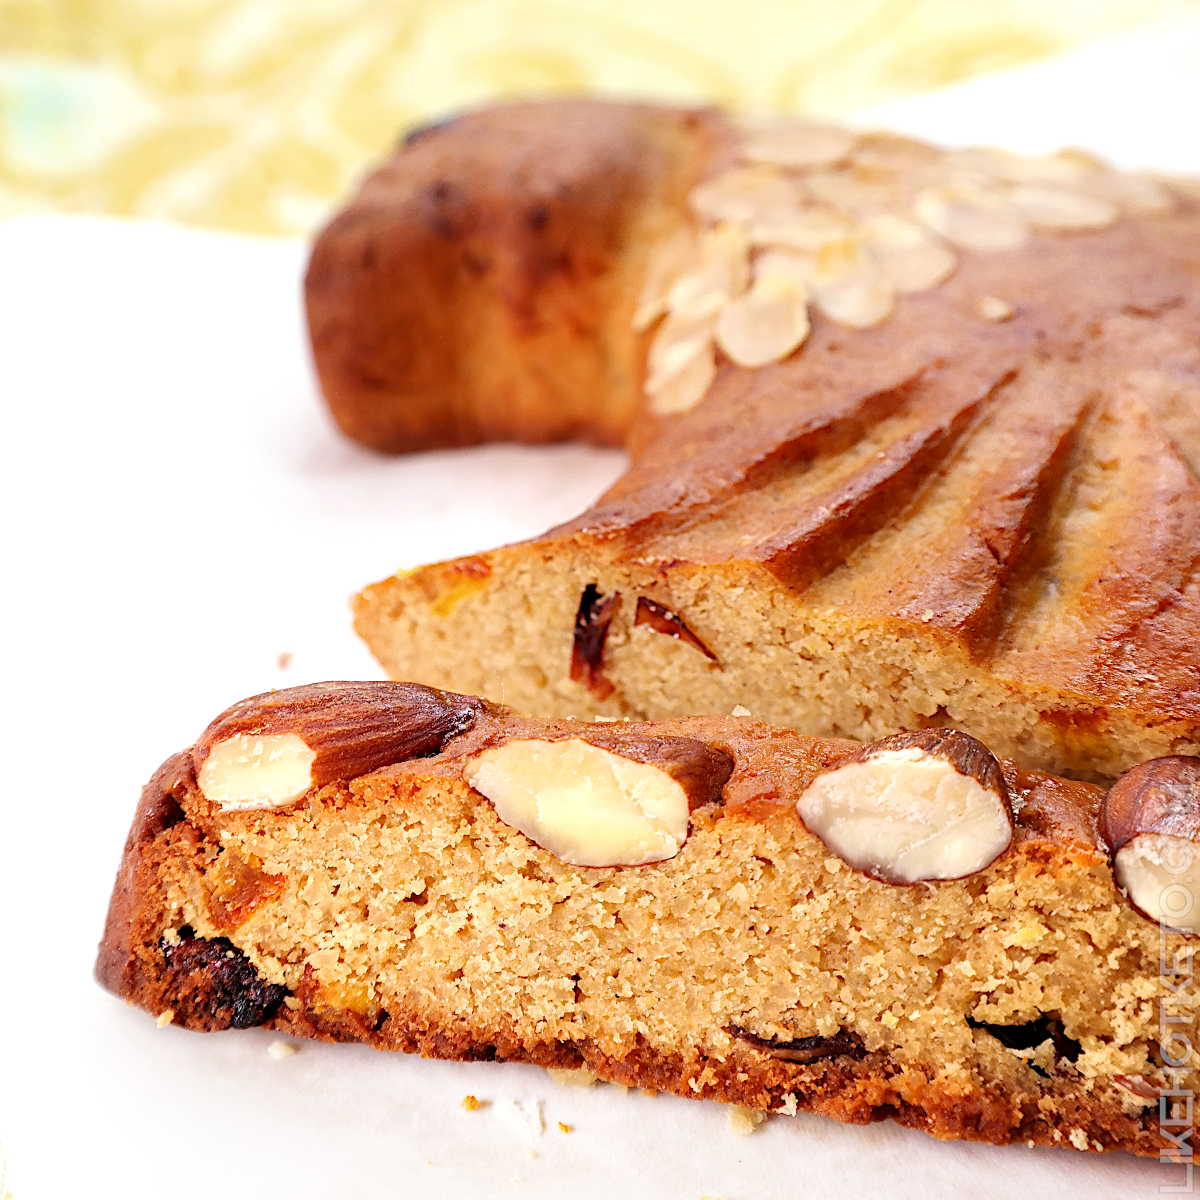 Low-carb and sugar-free sweet Italian bread with almonds.